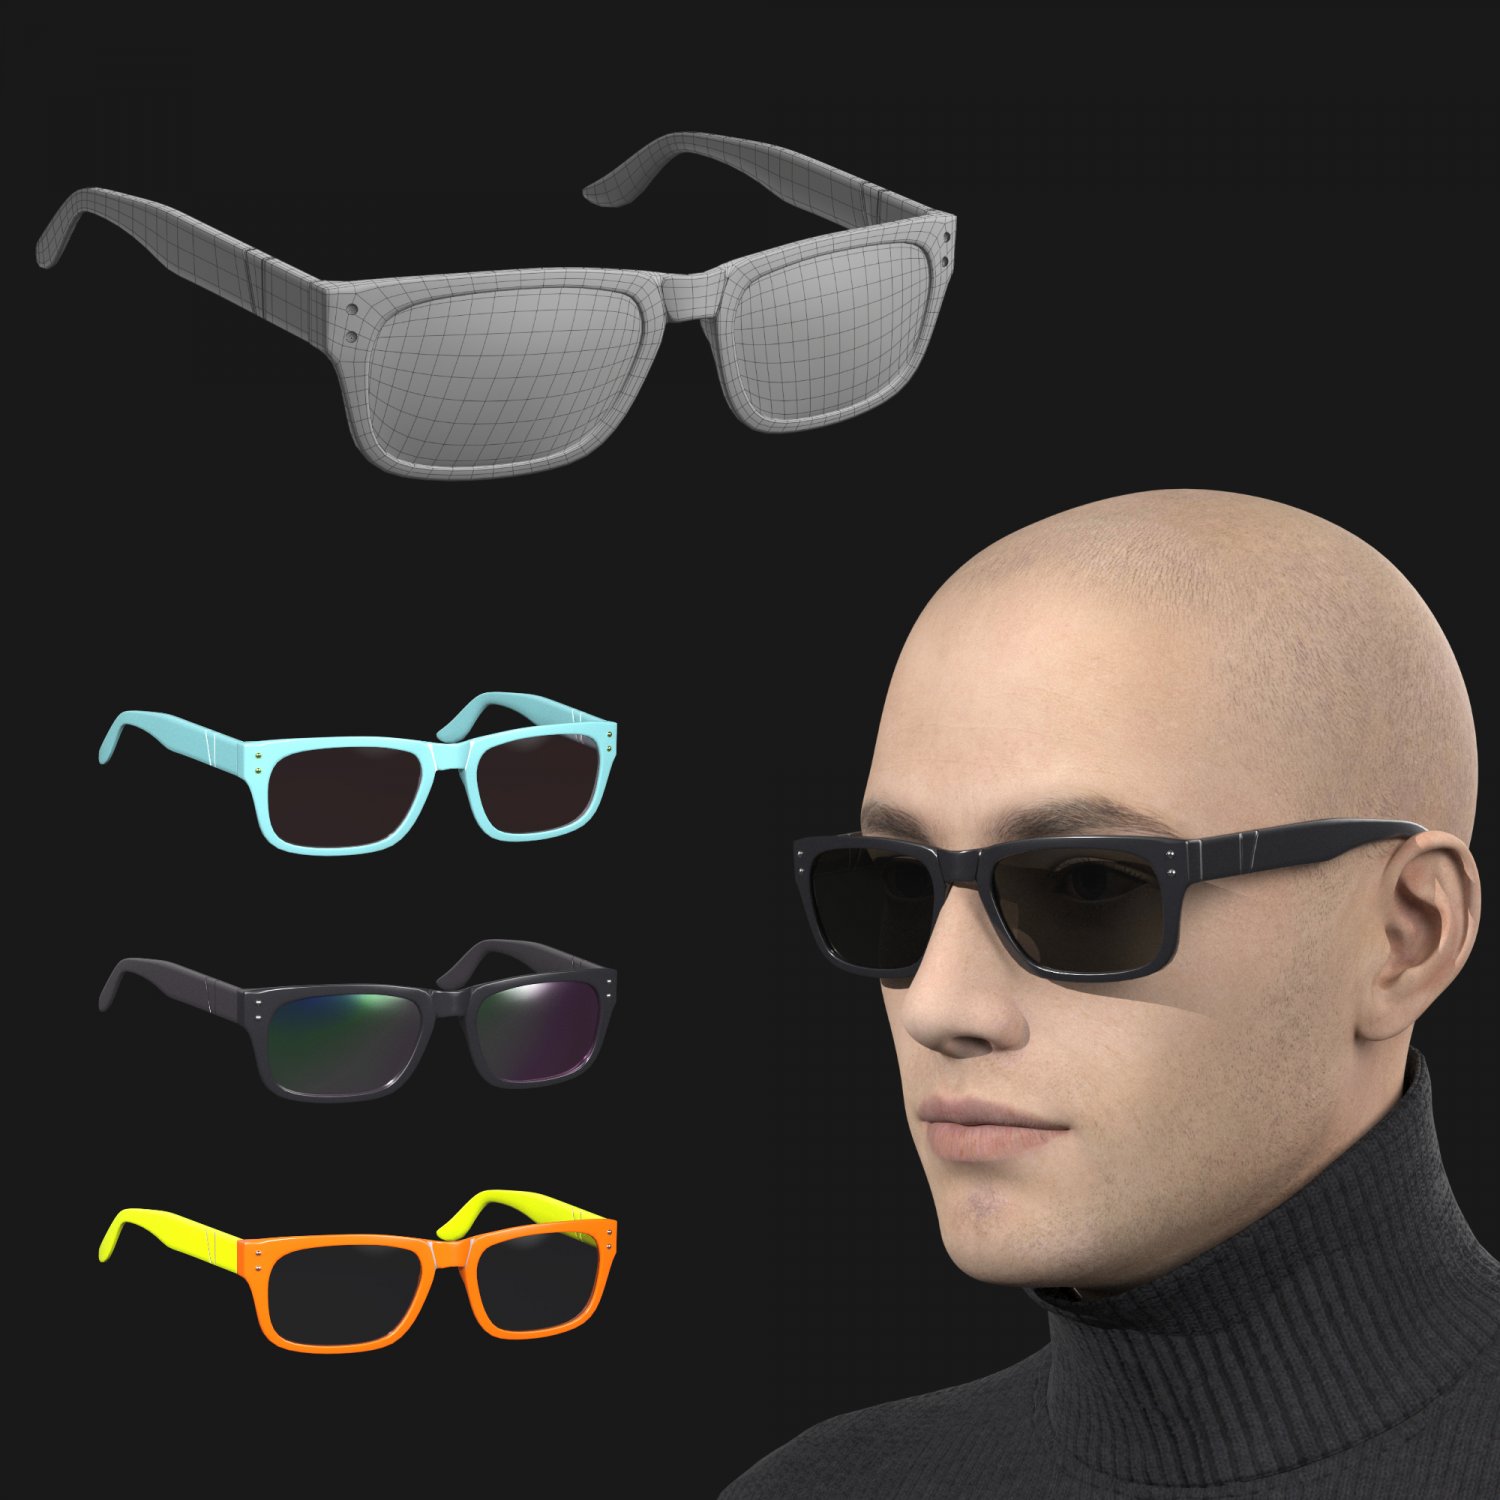 Sunglasses Accessories Low-poly 3D Model